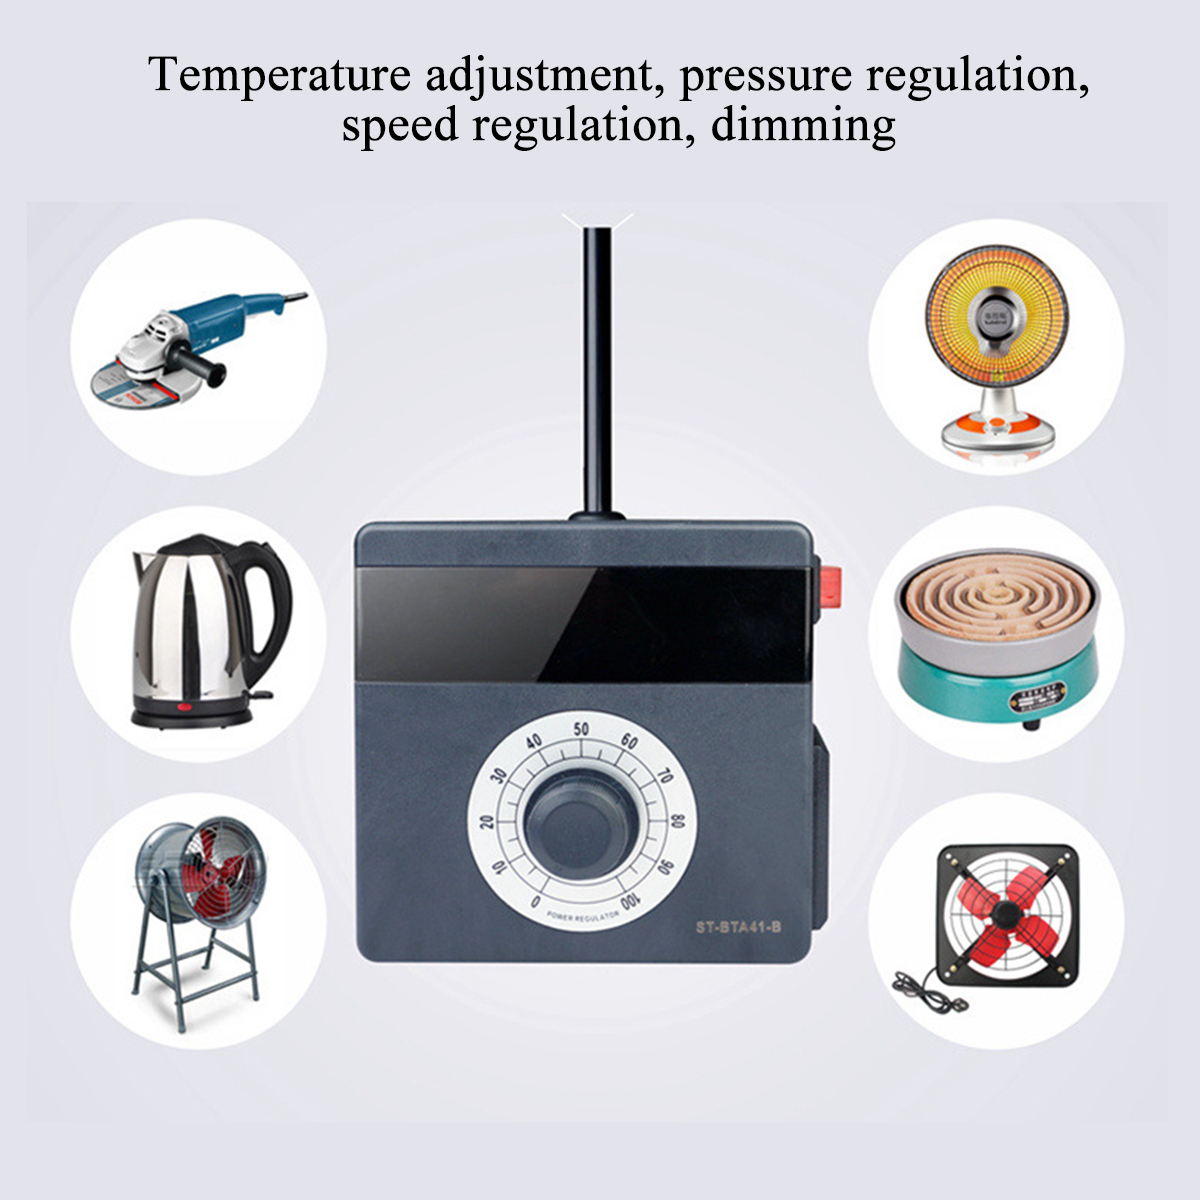 AC-220V-4000W-Variable-Electronic-Speeds-Voltage-Temperature-Controller-For-Fan-Motor-1468761-3